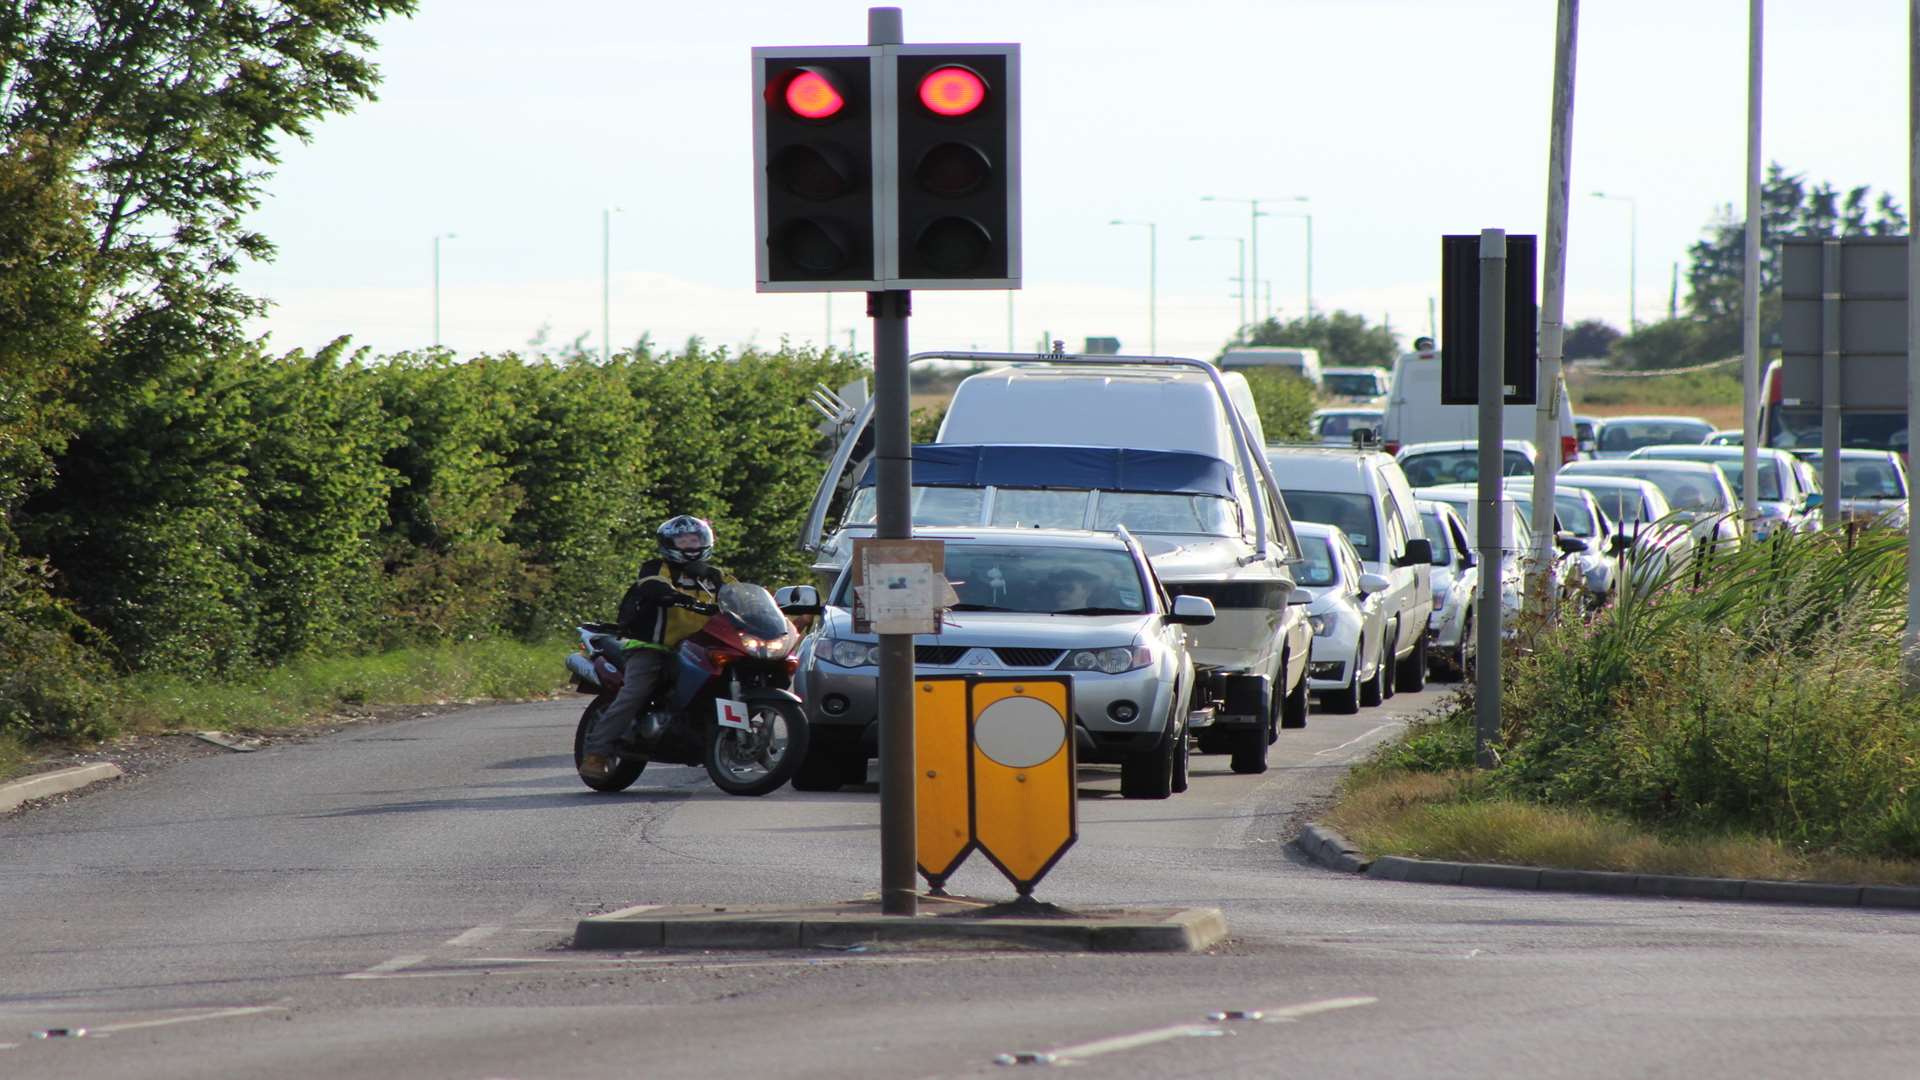 Traffic jams on Sheppey. Traffic lights at Lower Road junction with Barton Hill Drive